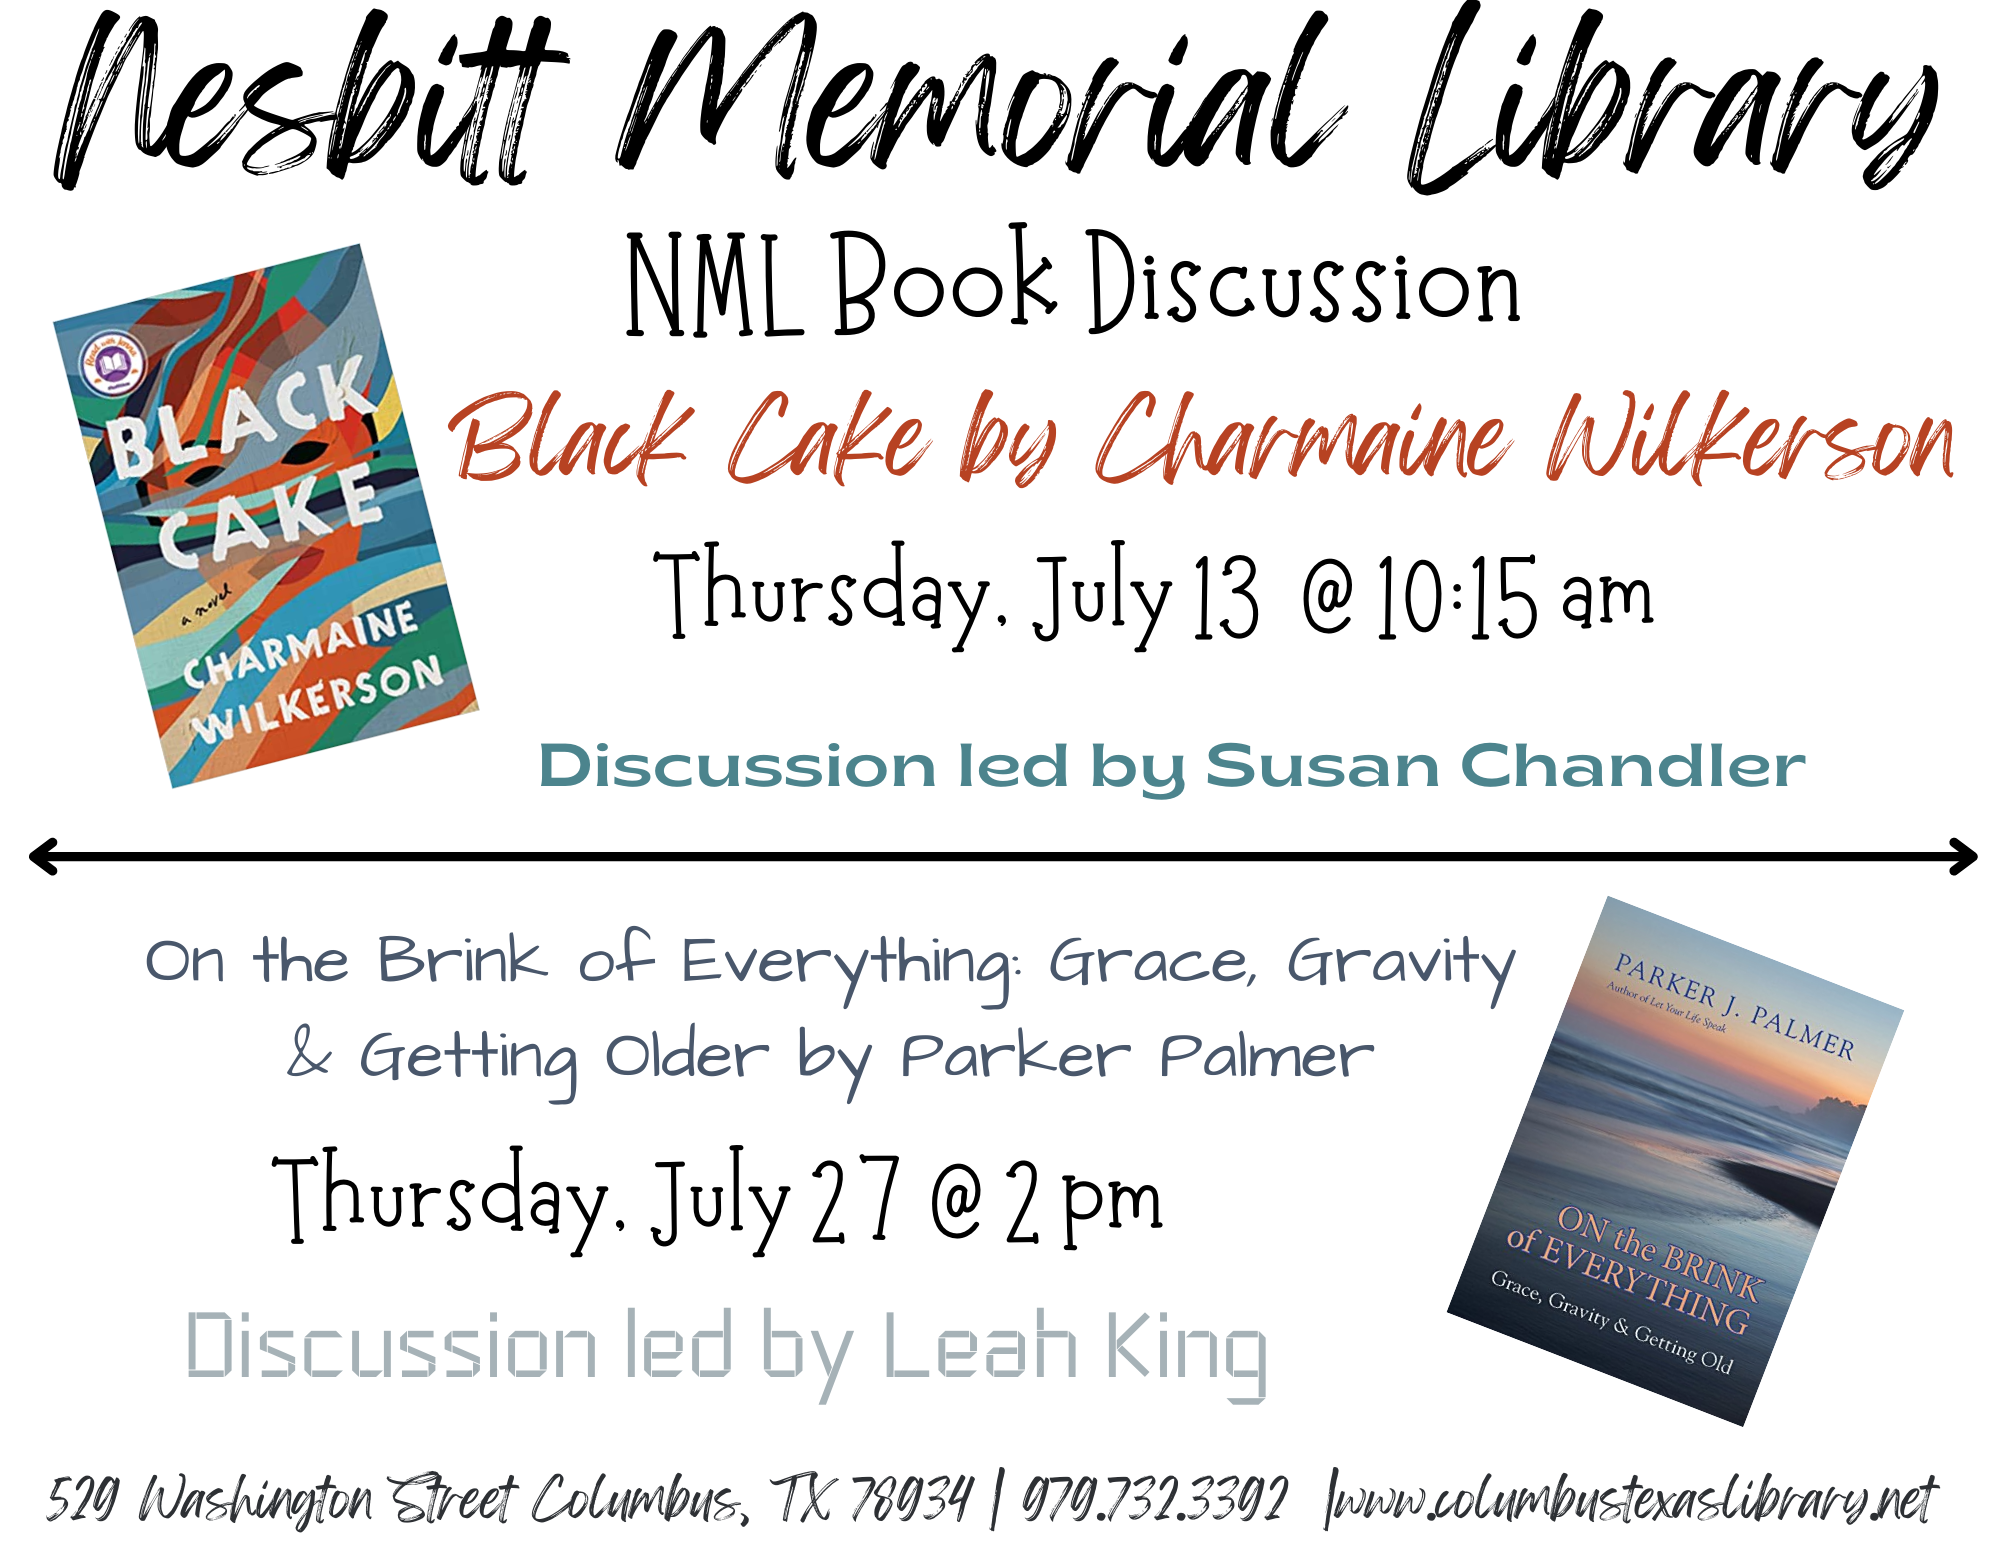  NML Book Discussions Jul 13th at 10:15am & Jul 27th at 2pm 